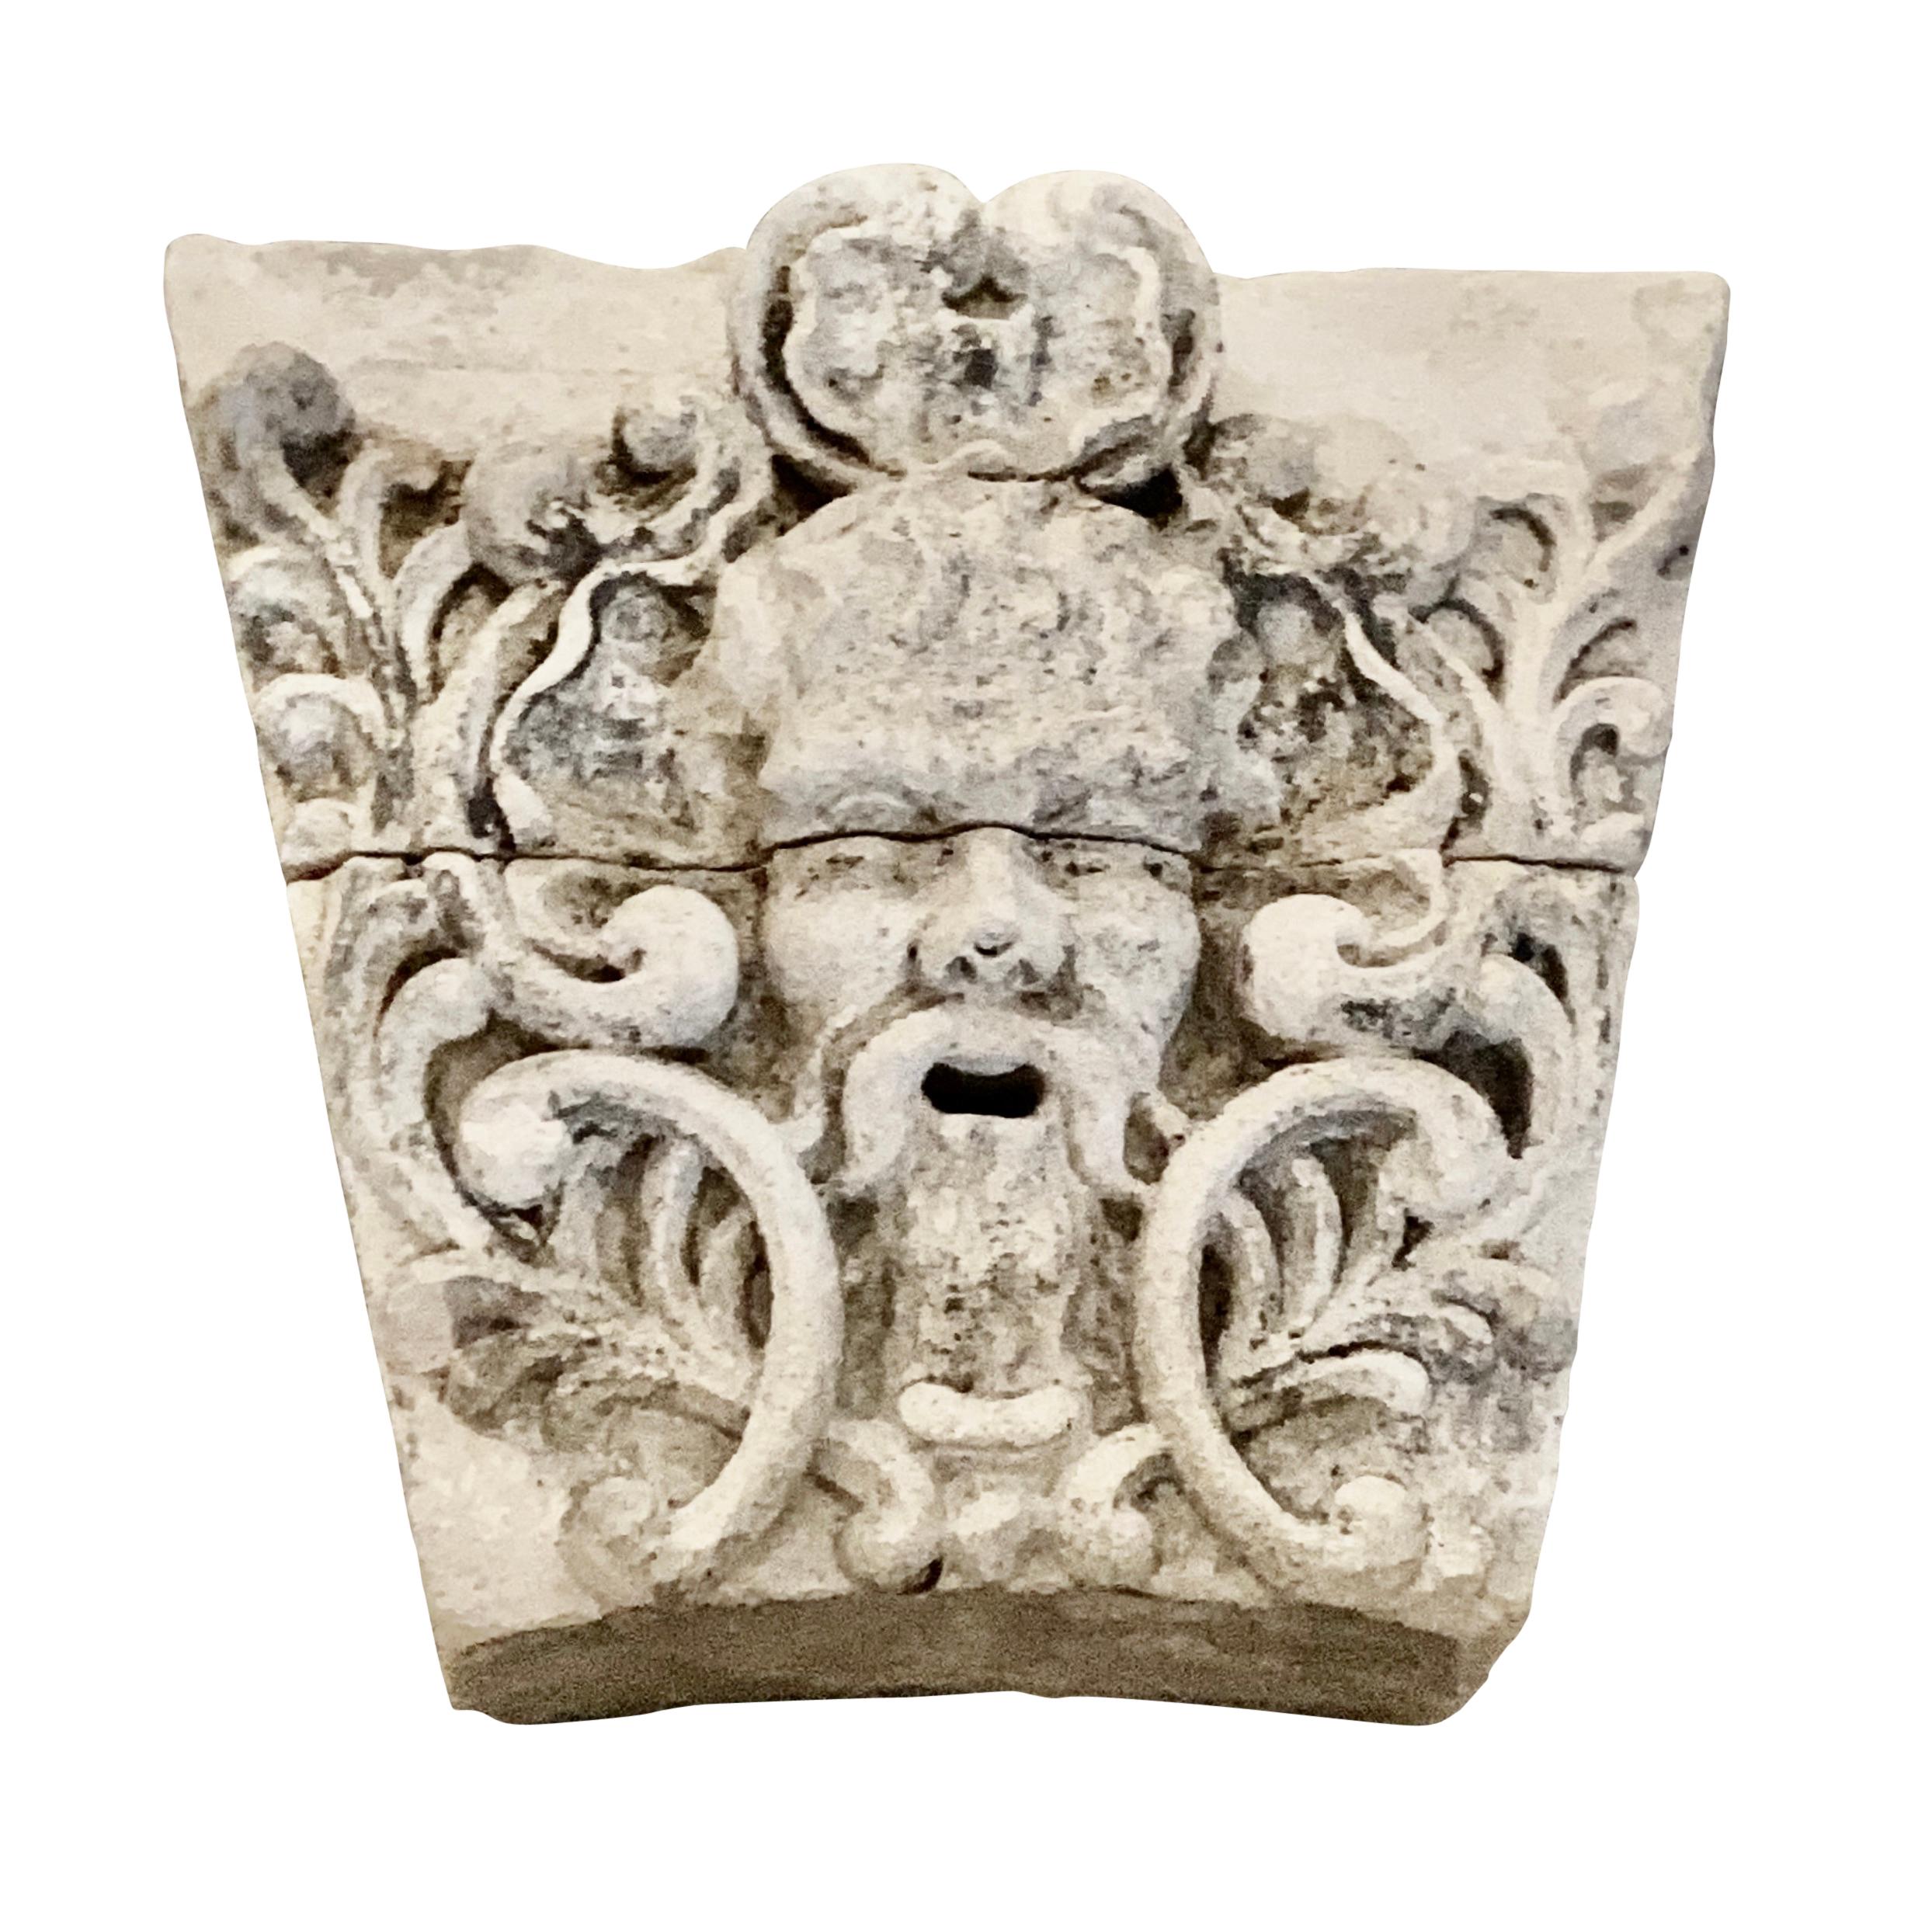 One of a kind French wall fountain in limestone. Typical LXIV style of the 19th century. 
Amazing and grand fountain for a bespoke luxury lifestyle design.
The head stone measures:
70 cm wide max 27.56 Inch
62 cm height 24.41 Inch
The basin